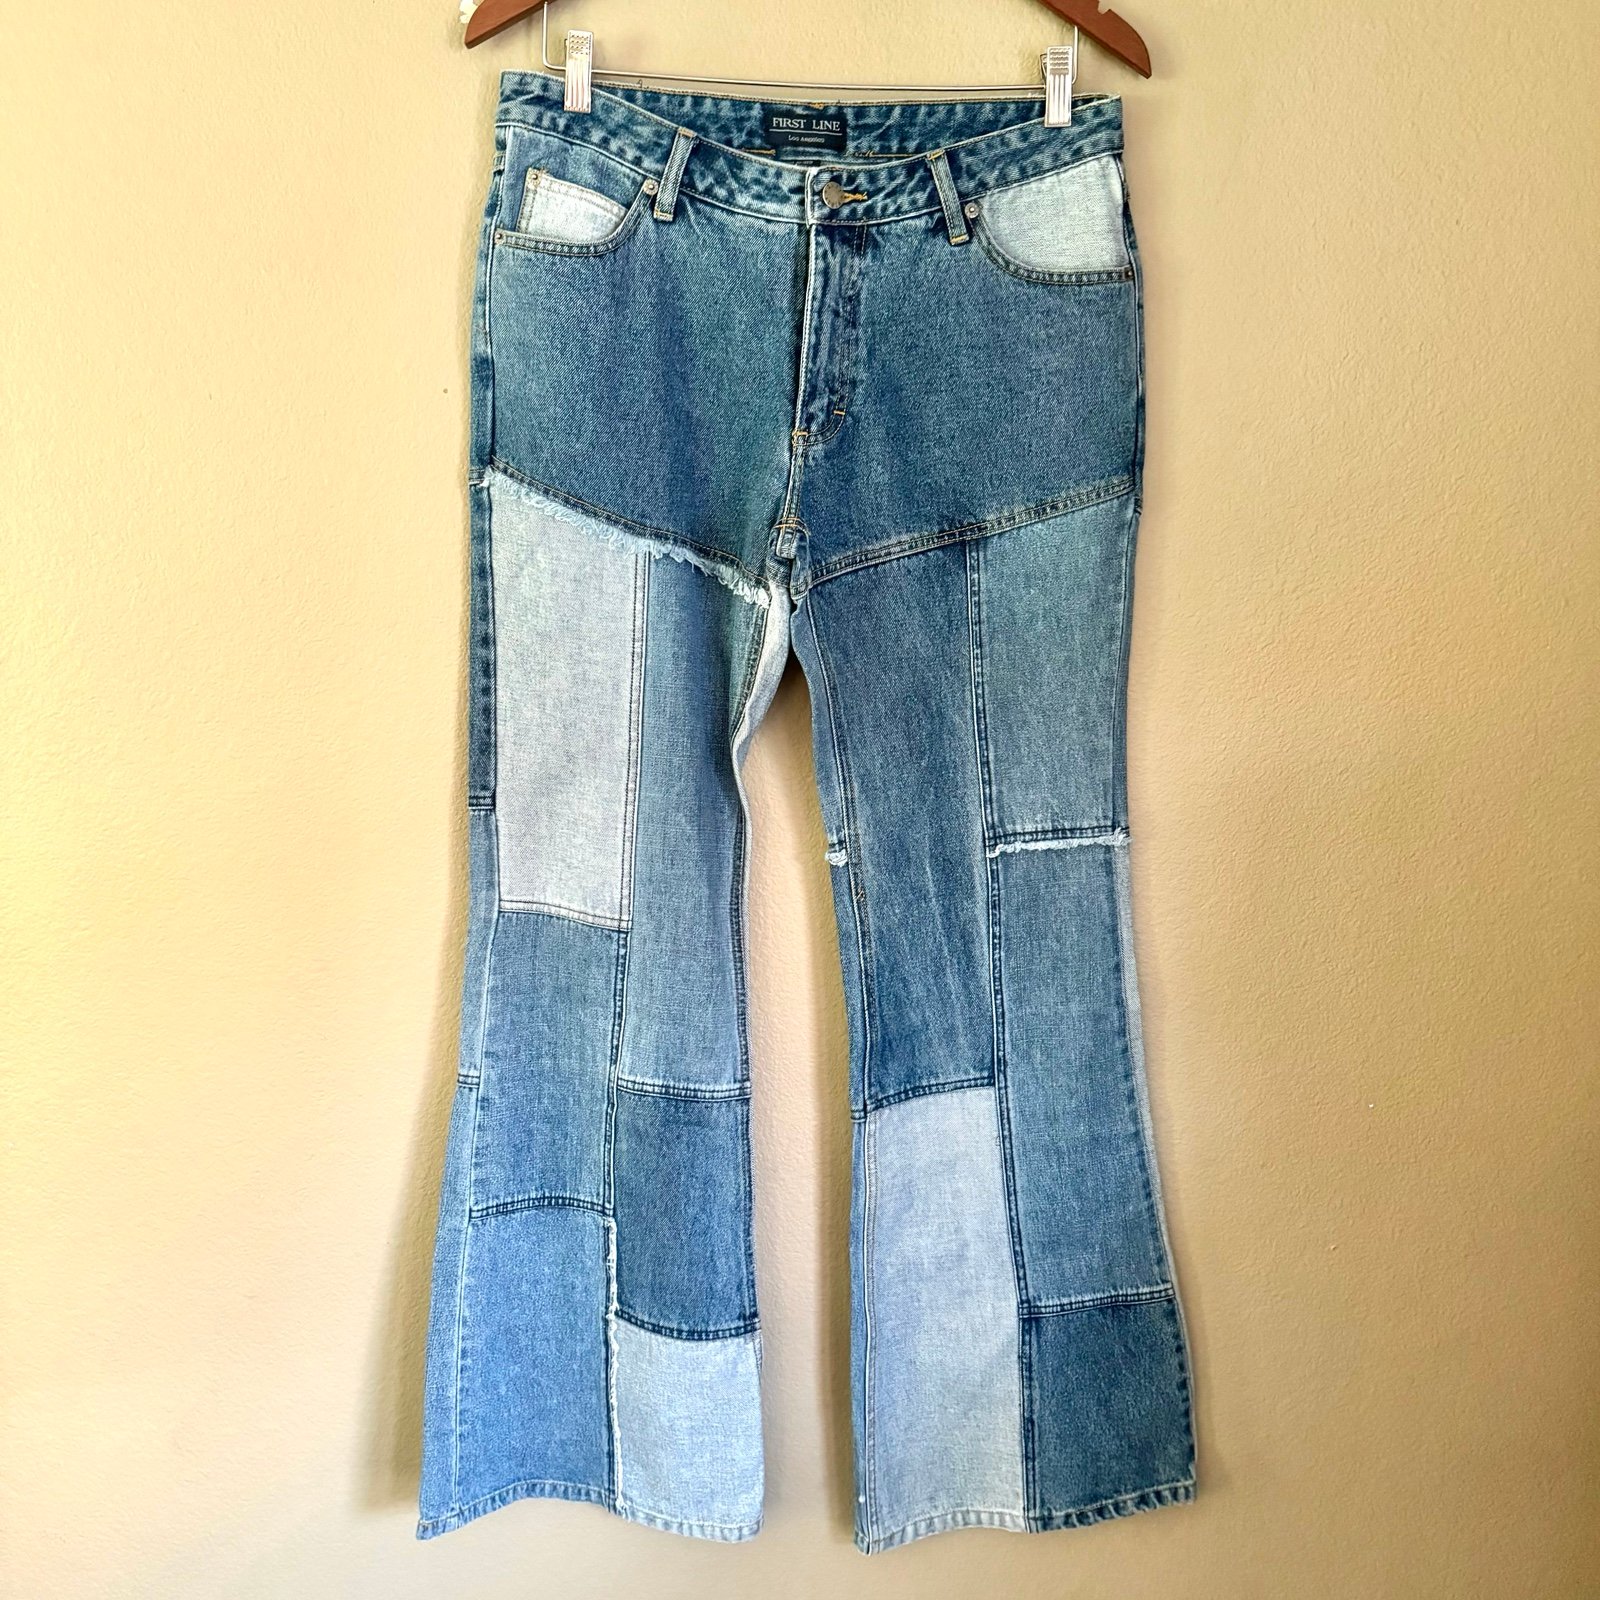 Popular First Line Mid Rise Patchwork Denim Bootcut Flare Jeans Blue Size 13/14 hdoG5Gtl6 well sale